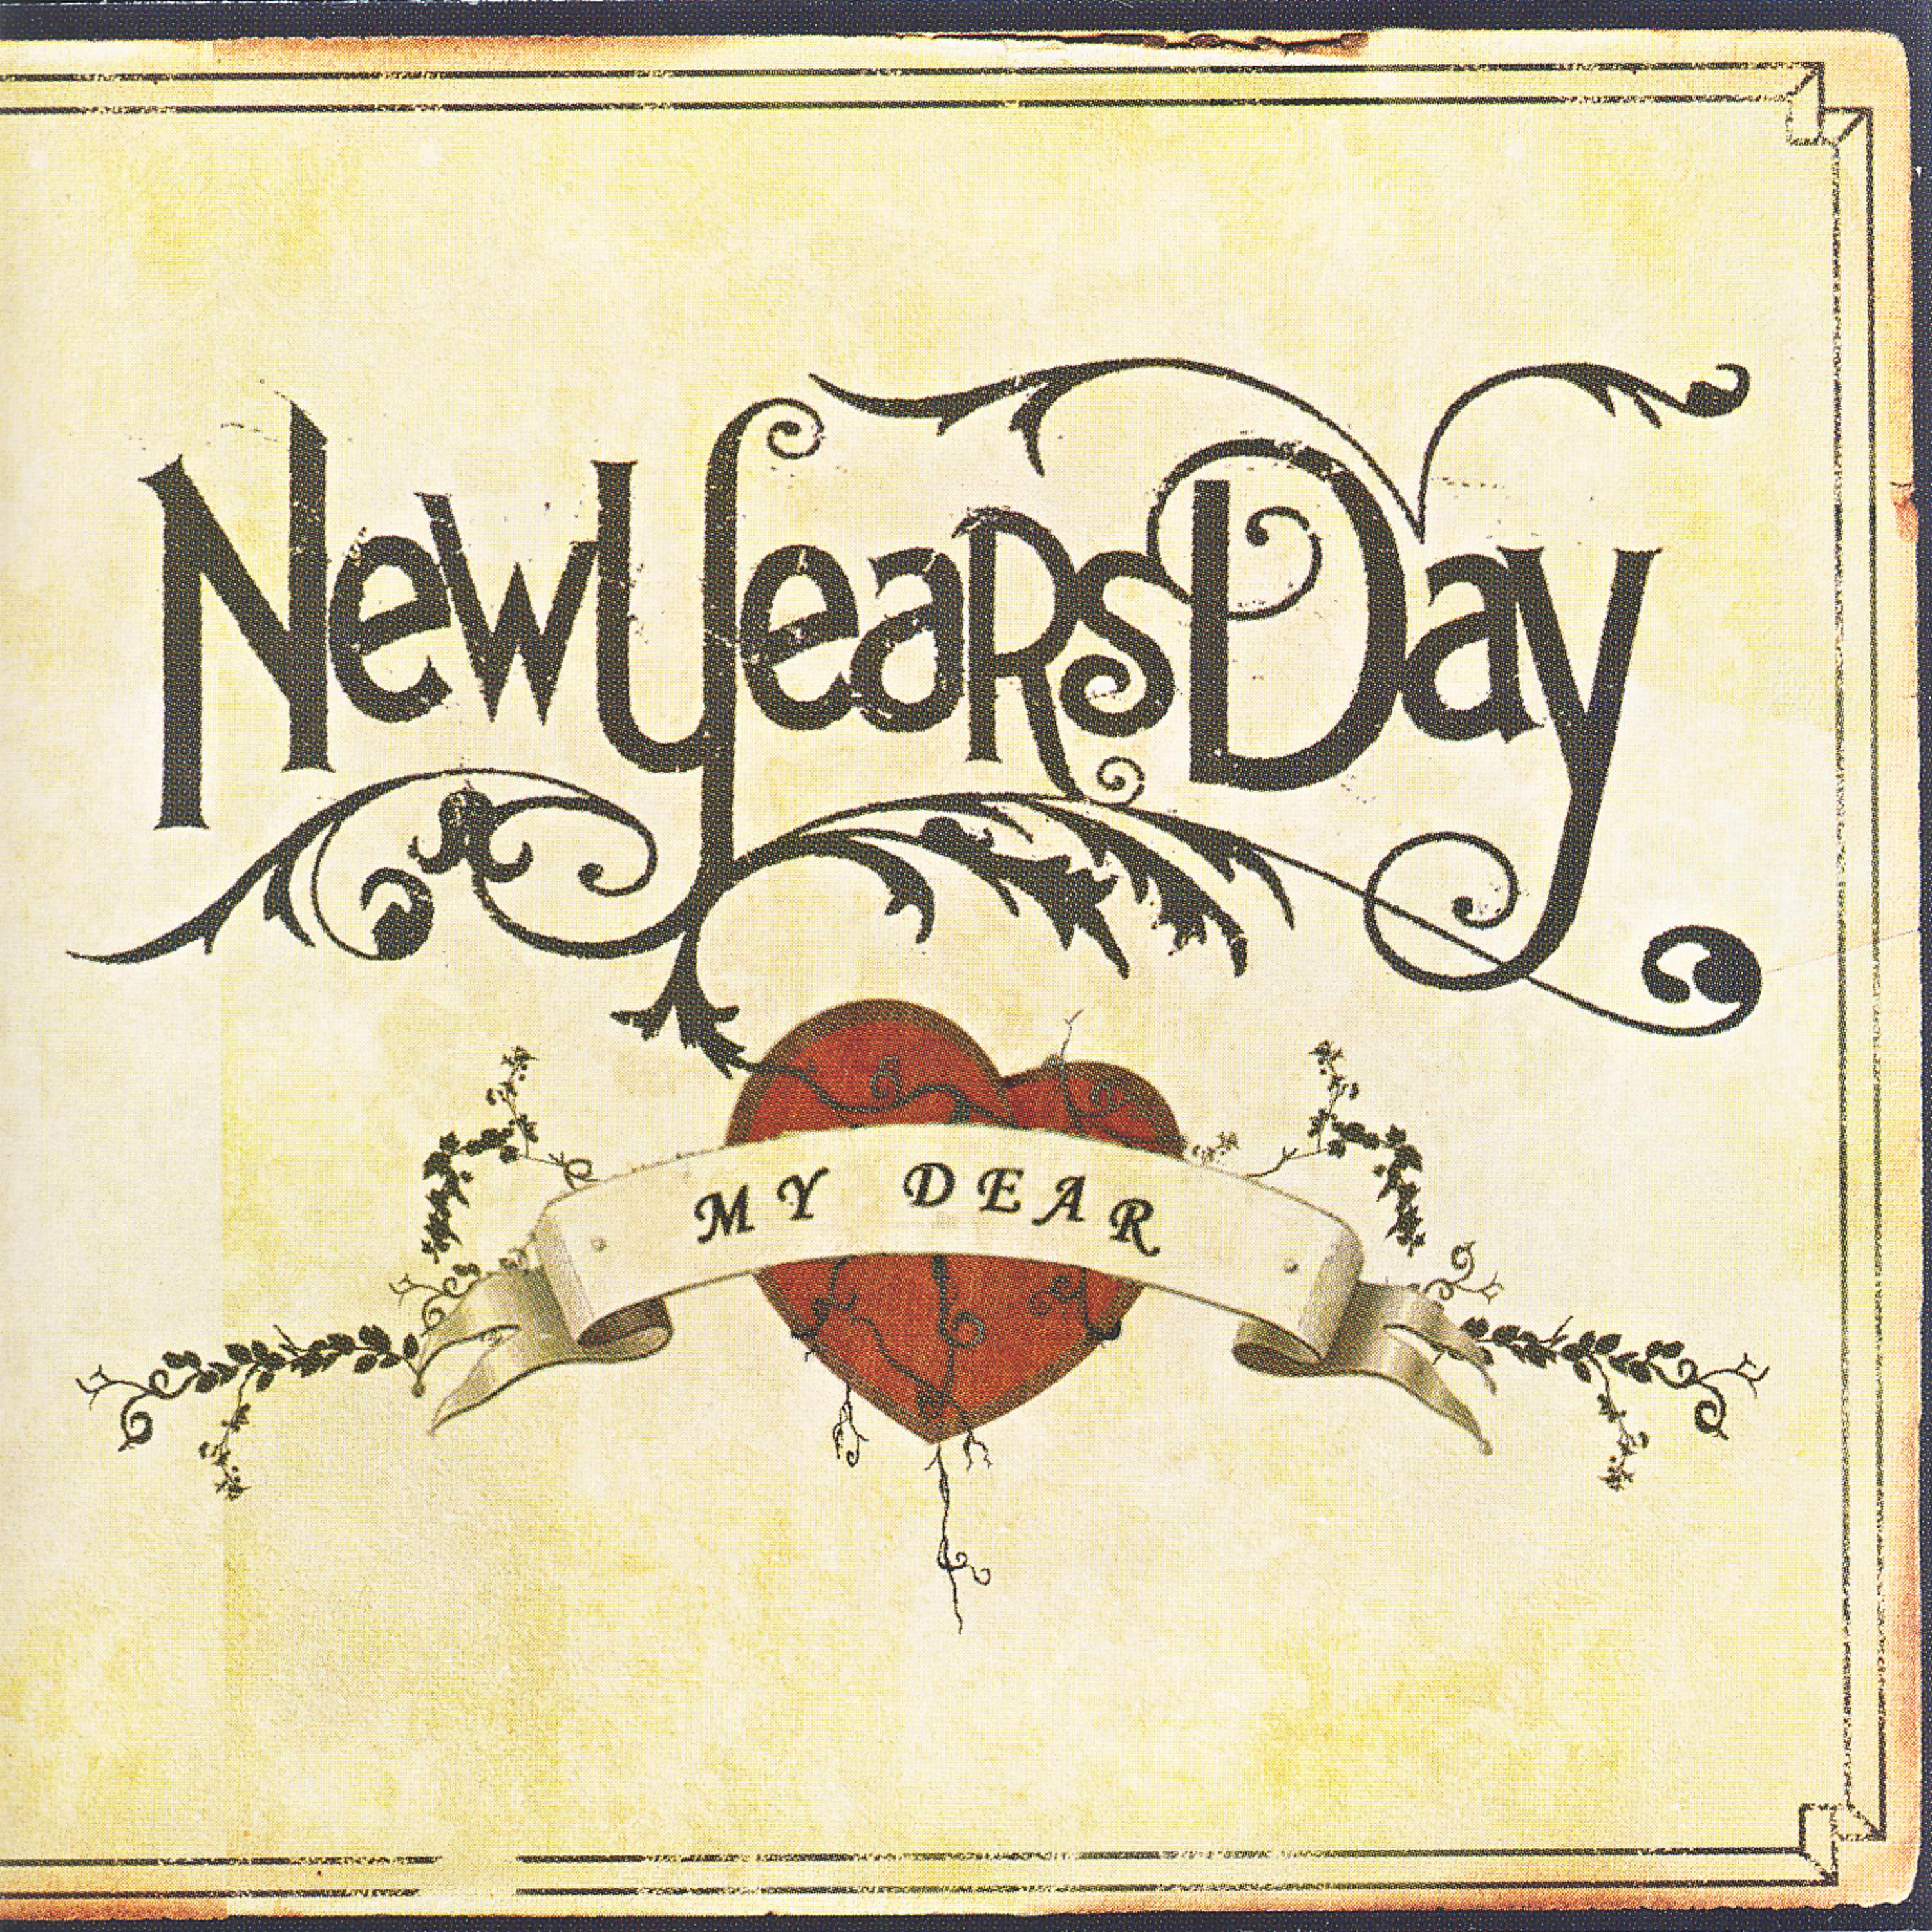 Bad new days. New years Day 2007 - my Dear. New years Day группа. Кейт Дровер New years Day. New years Day надпись.